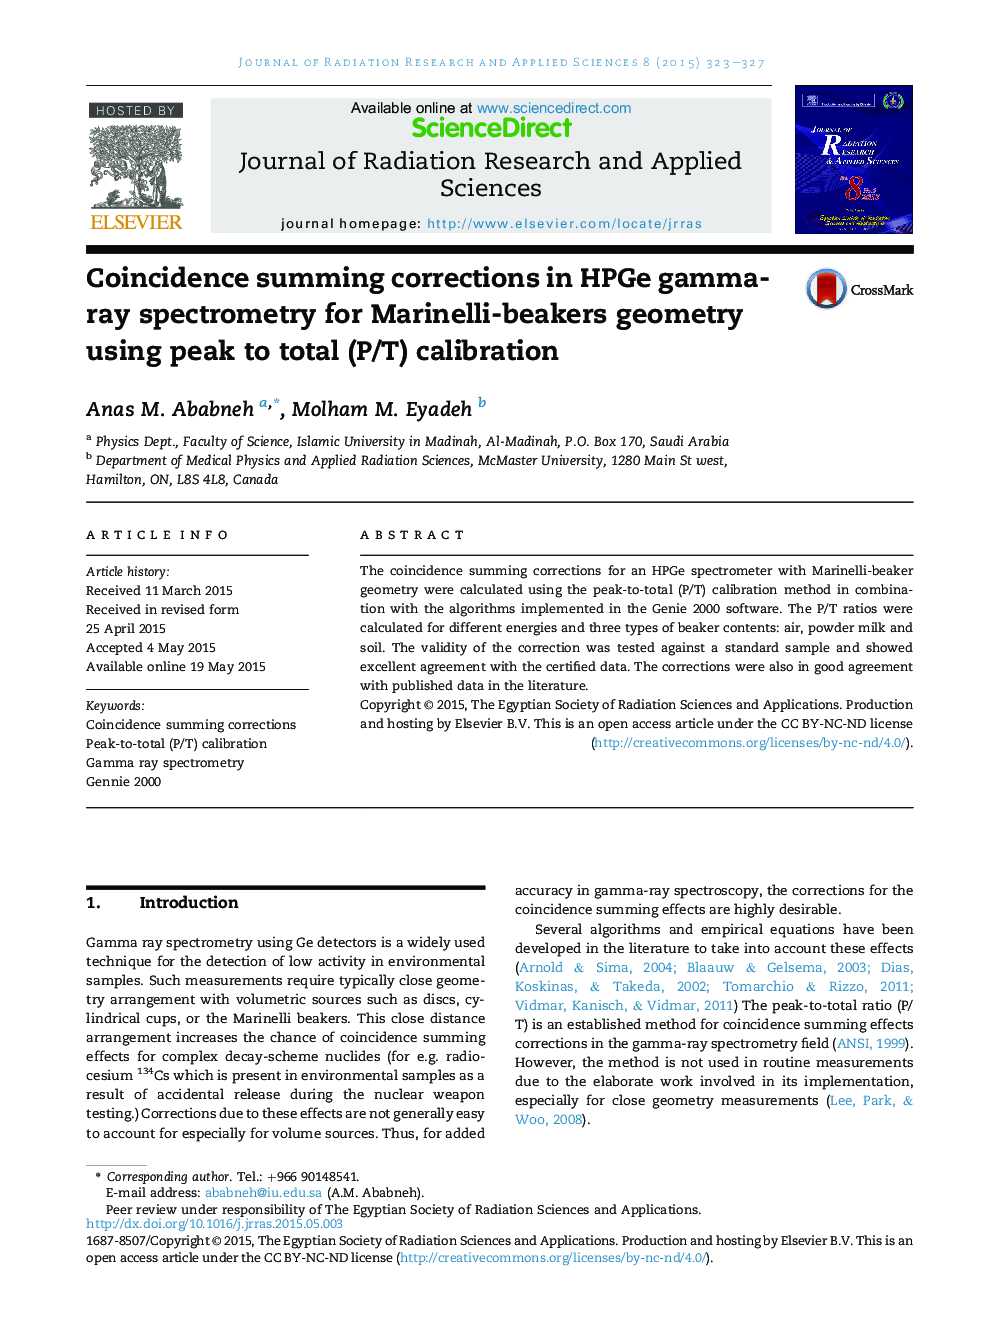 Coincidence summing corrections in HPGe gamma-ray spectrometry for Marinelli-beakers geometry using peak to total (P/T) calibration 